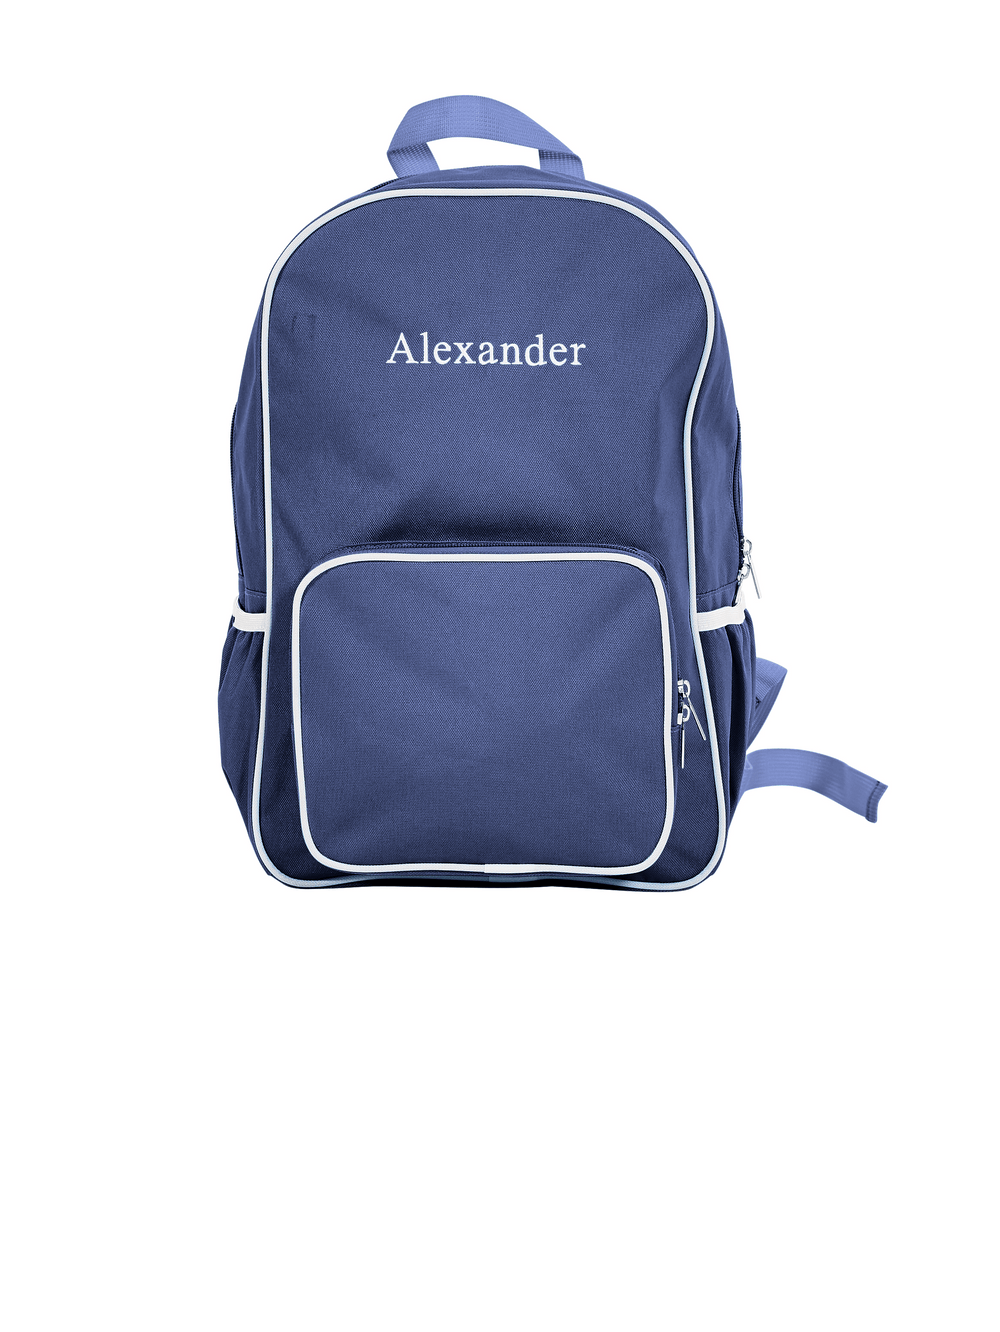 Personalisation - Backpack (Embroidery Only)